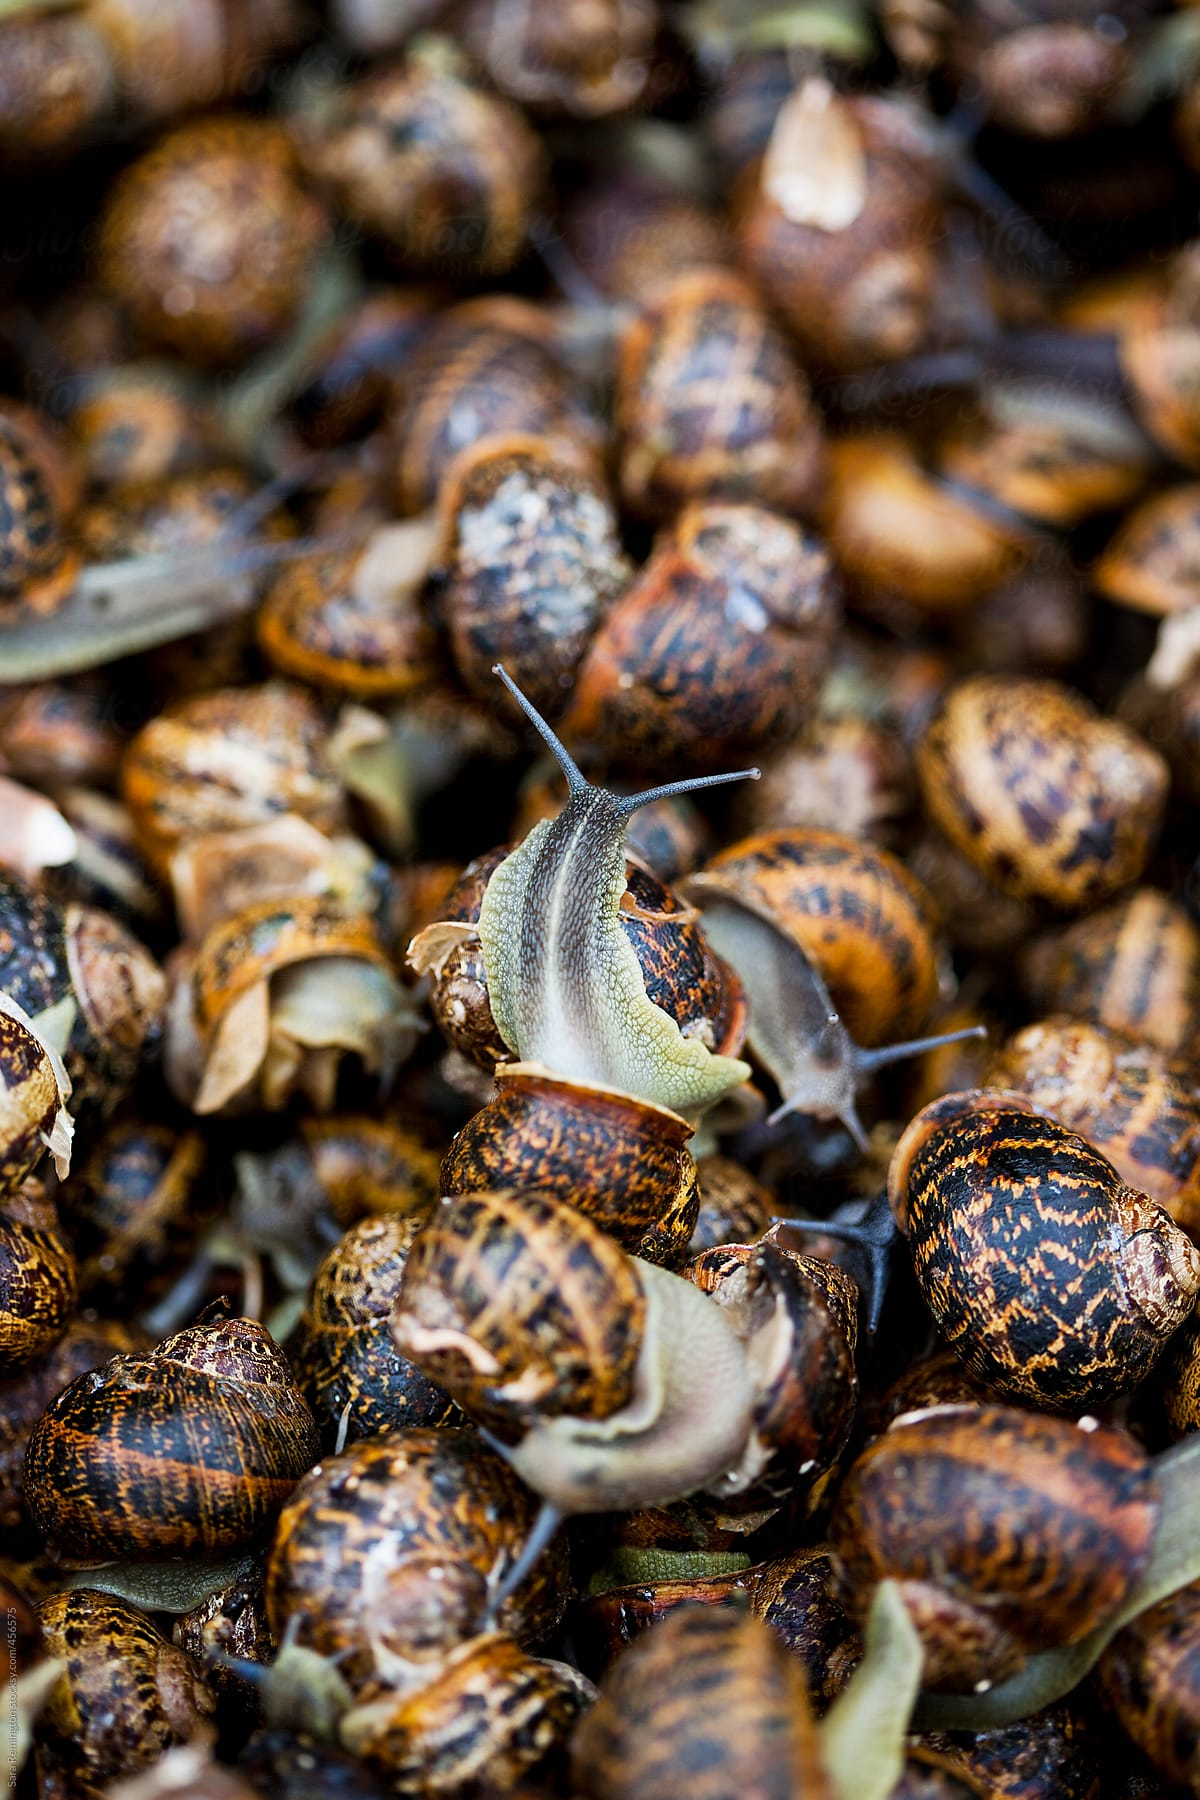 Snails for Sale At Farmer's Market In Greece